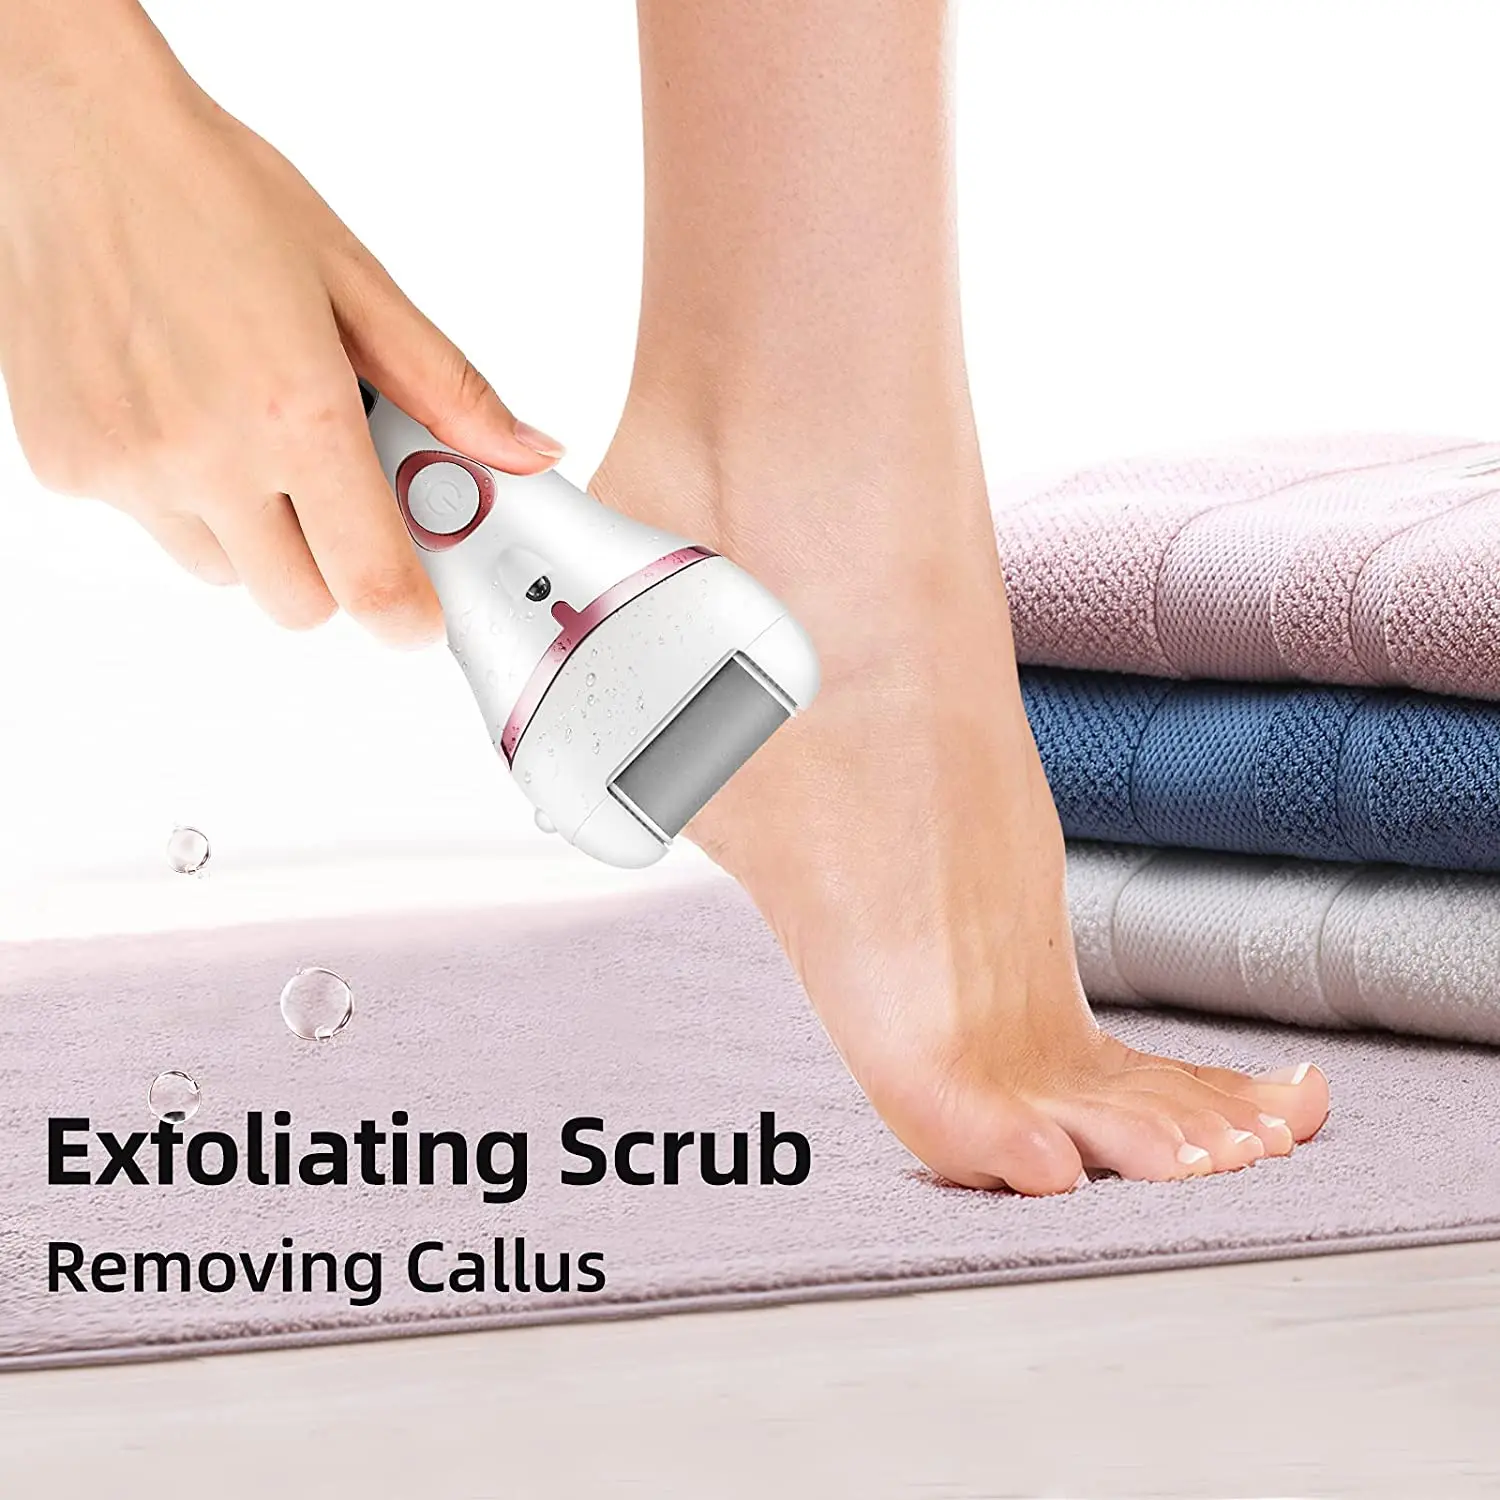 Led Electric Pedicure Foot Grinder Vacuum Cleaner Portable File Callus  Remover Dead Skin Care Tools Trimmer Exfoliating Sander - Foot Care Tool -  AliExpress